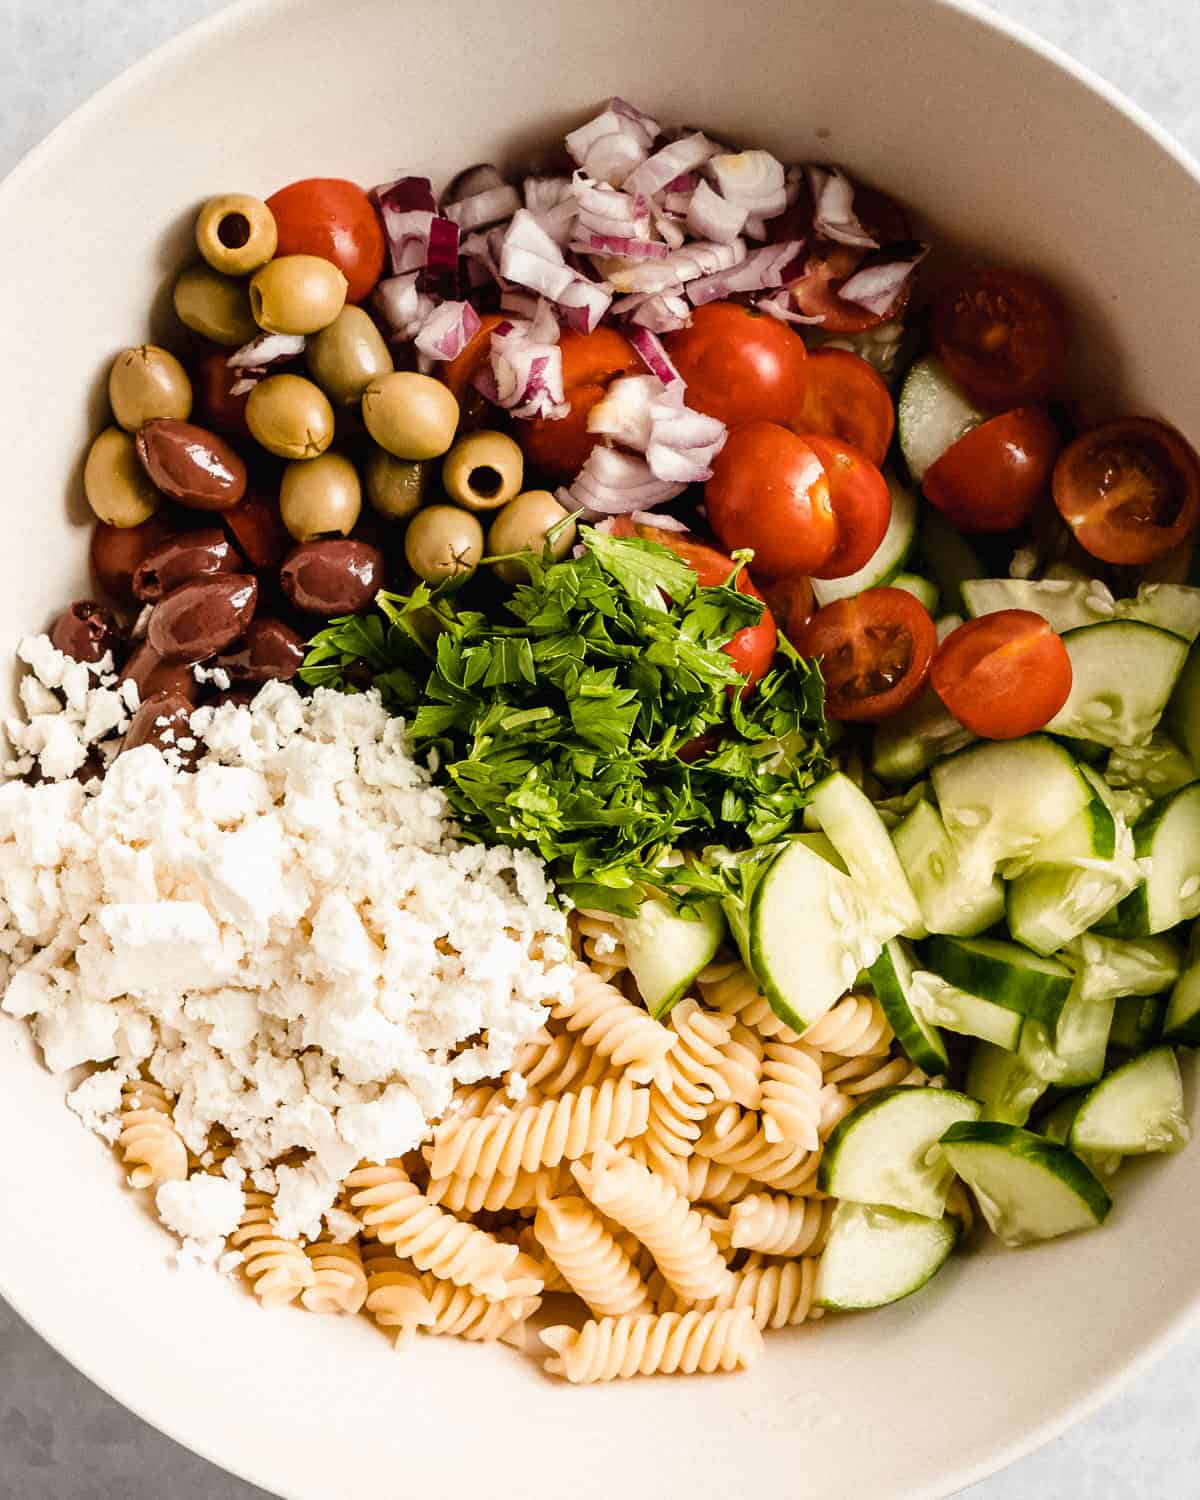 all of the ingredients for the pasta salad in a bowl.